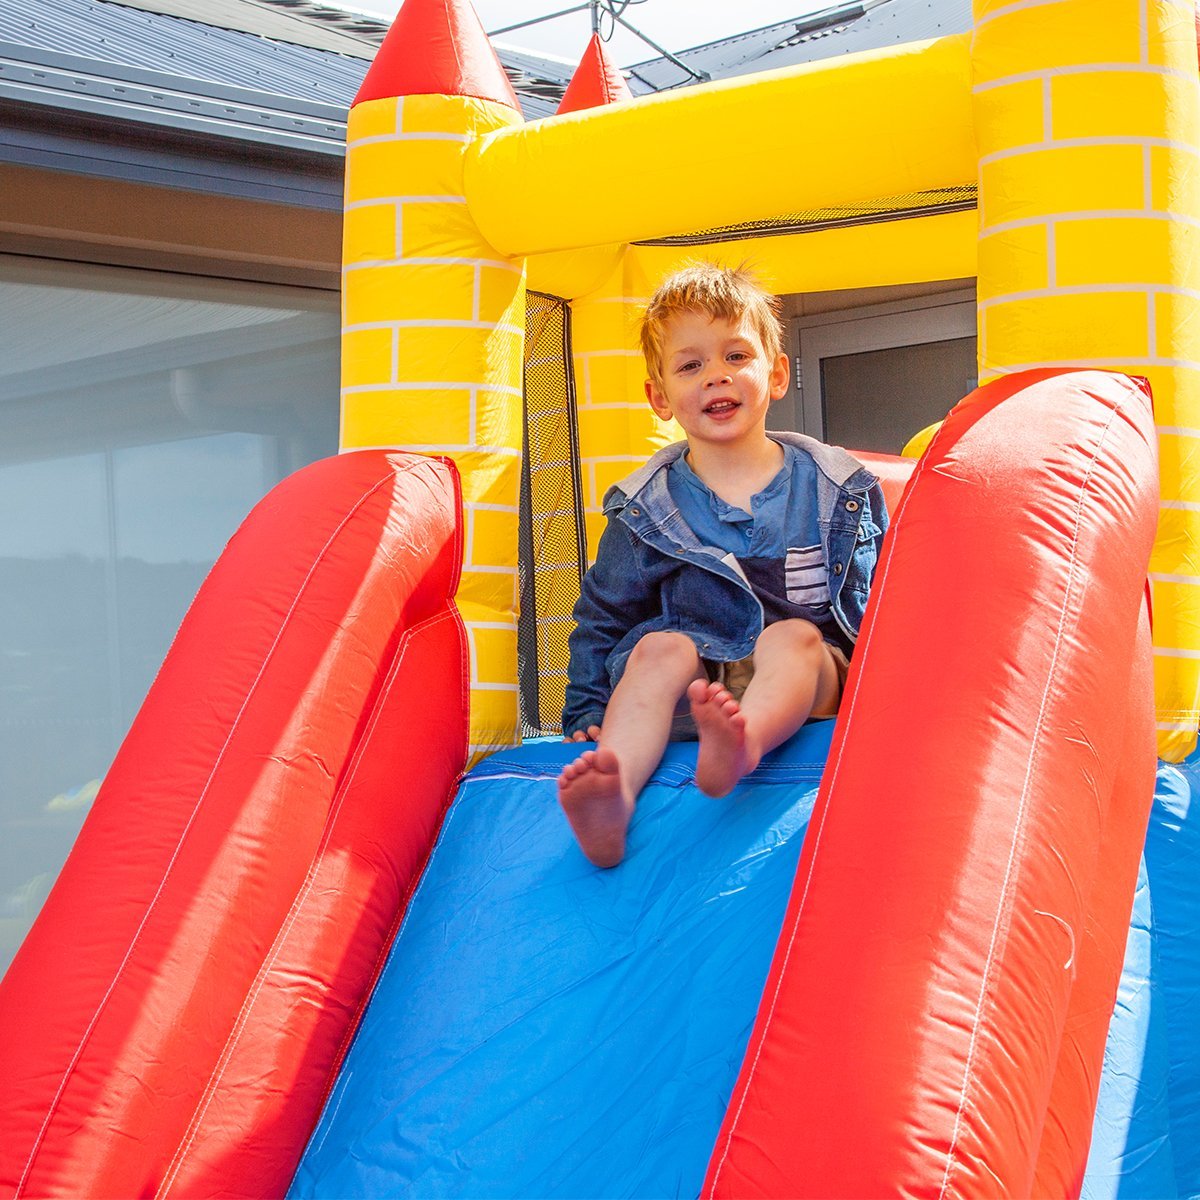 Child playing on slide in jumping castle